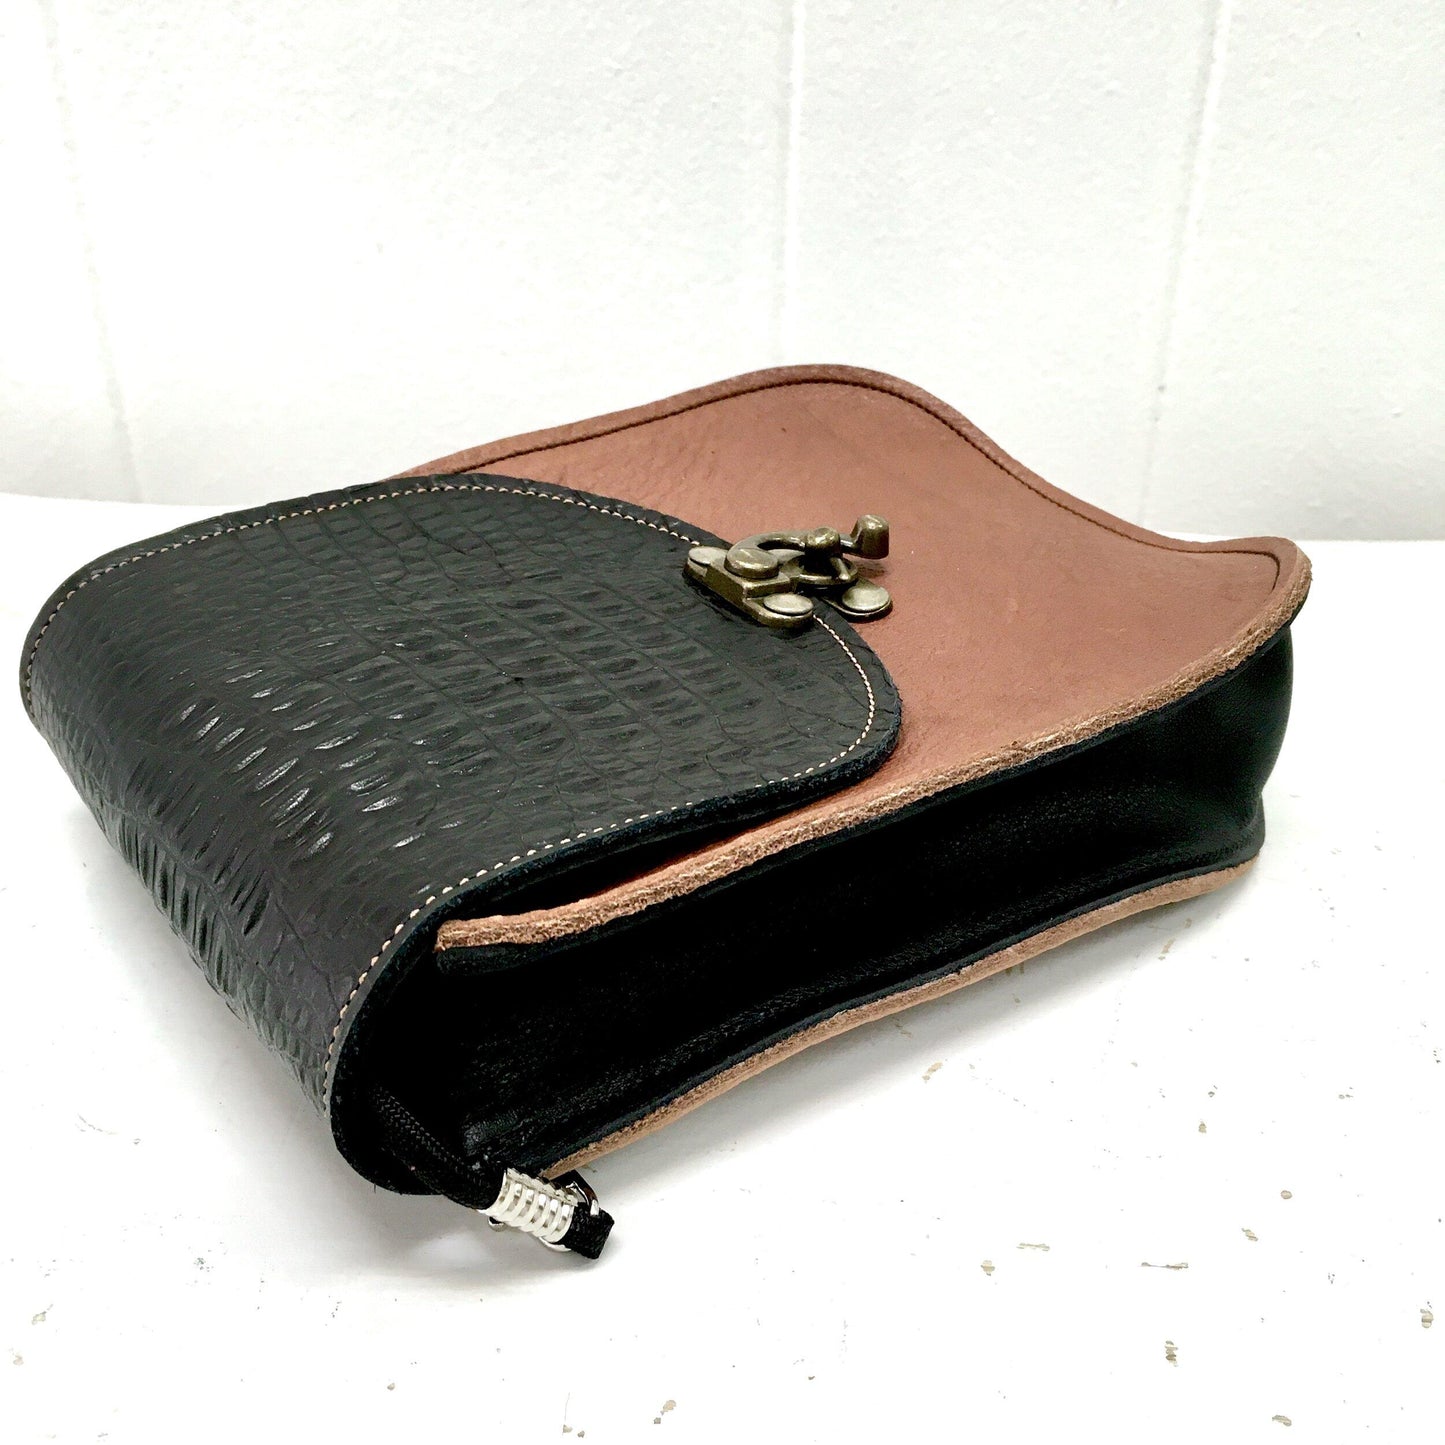 Essentials Convertible Bag Tobacco Brown with Black flap and side gusset